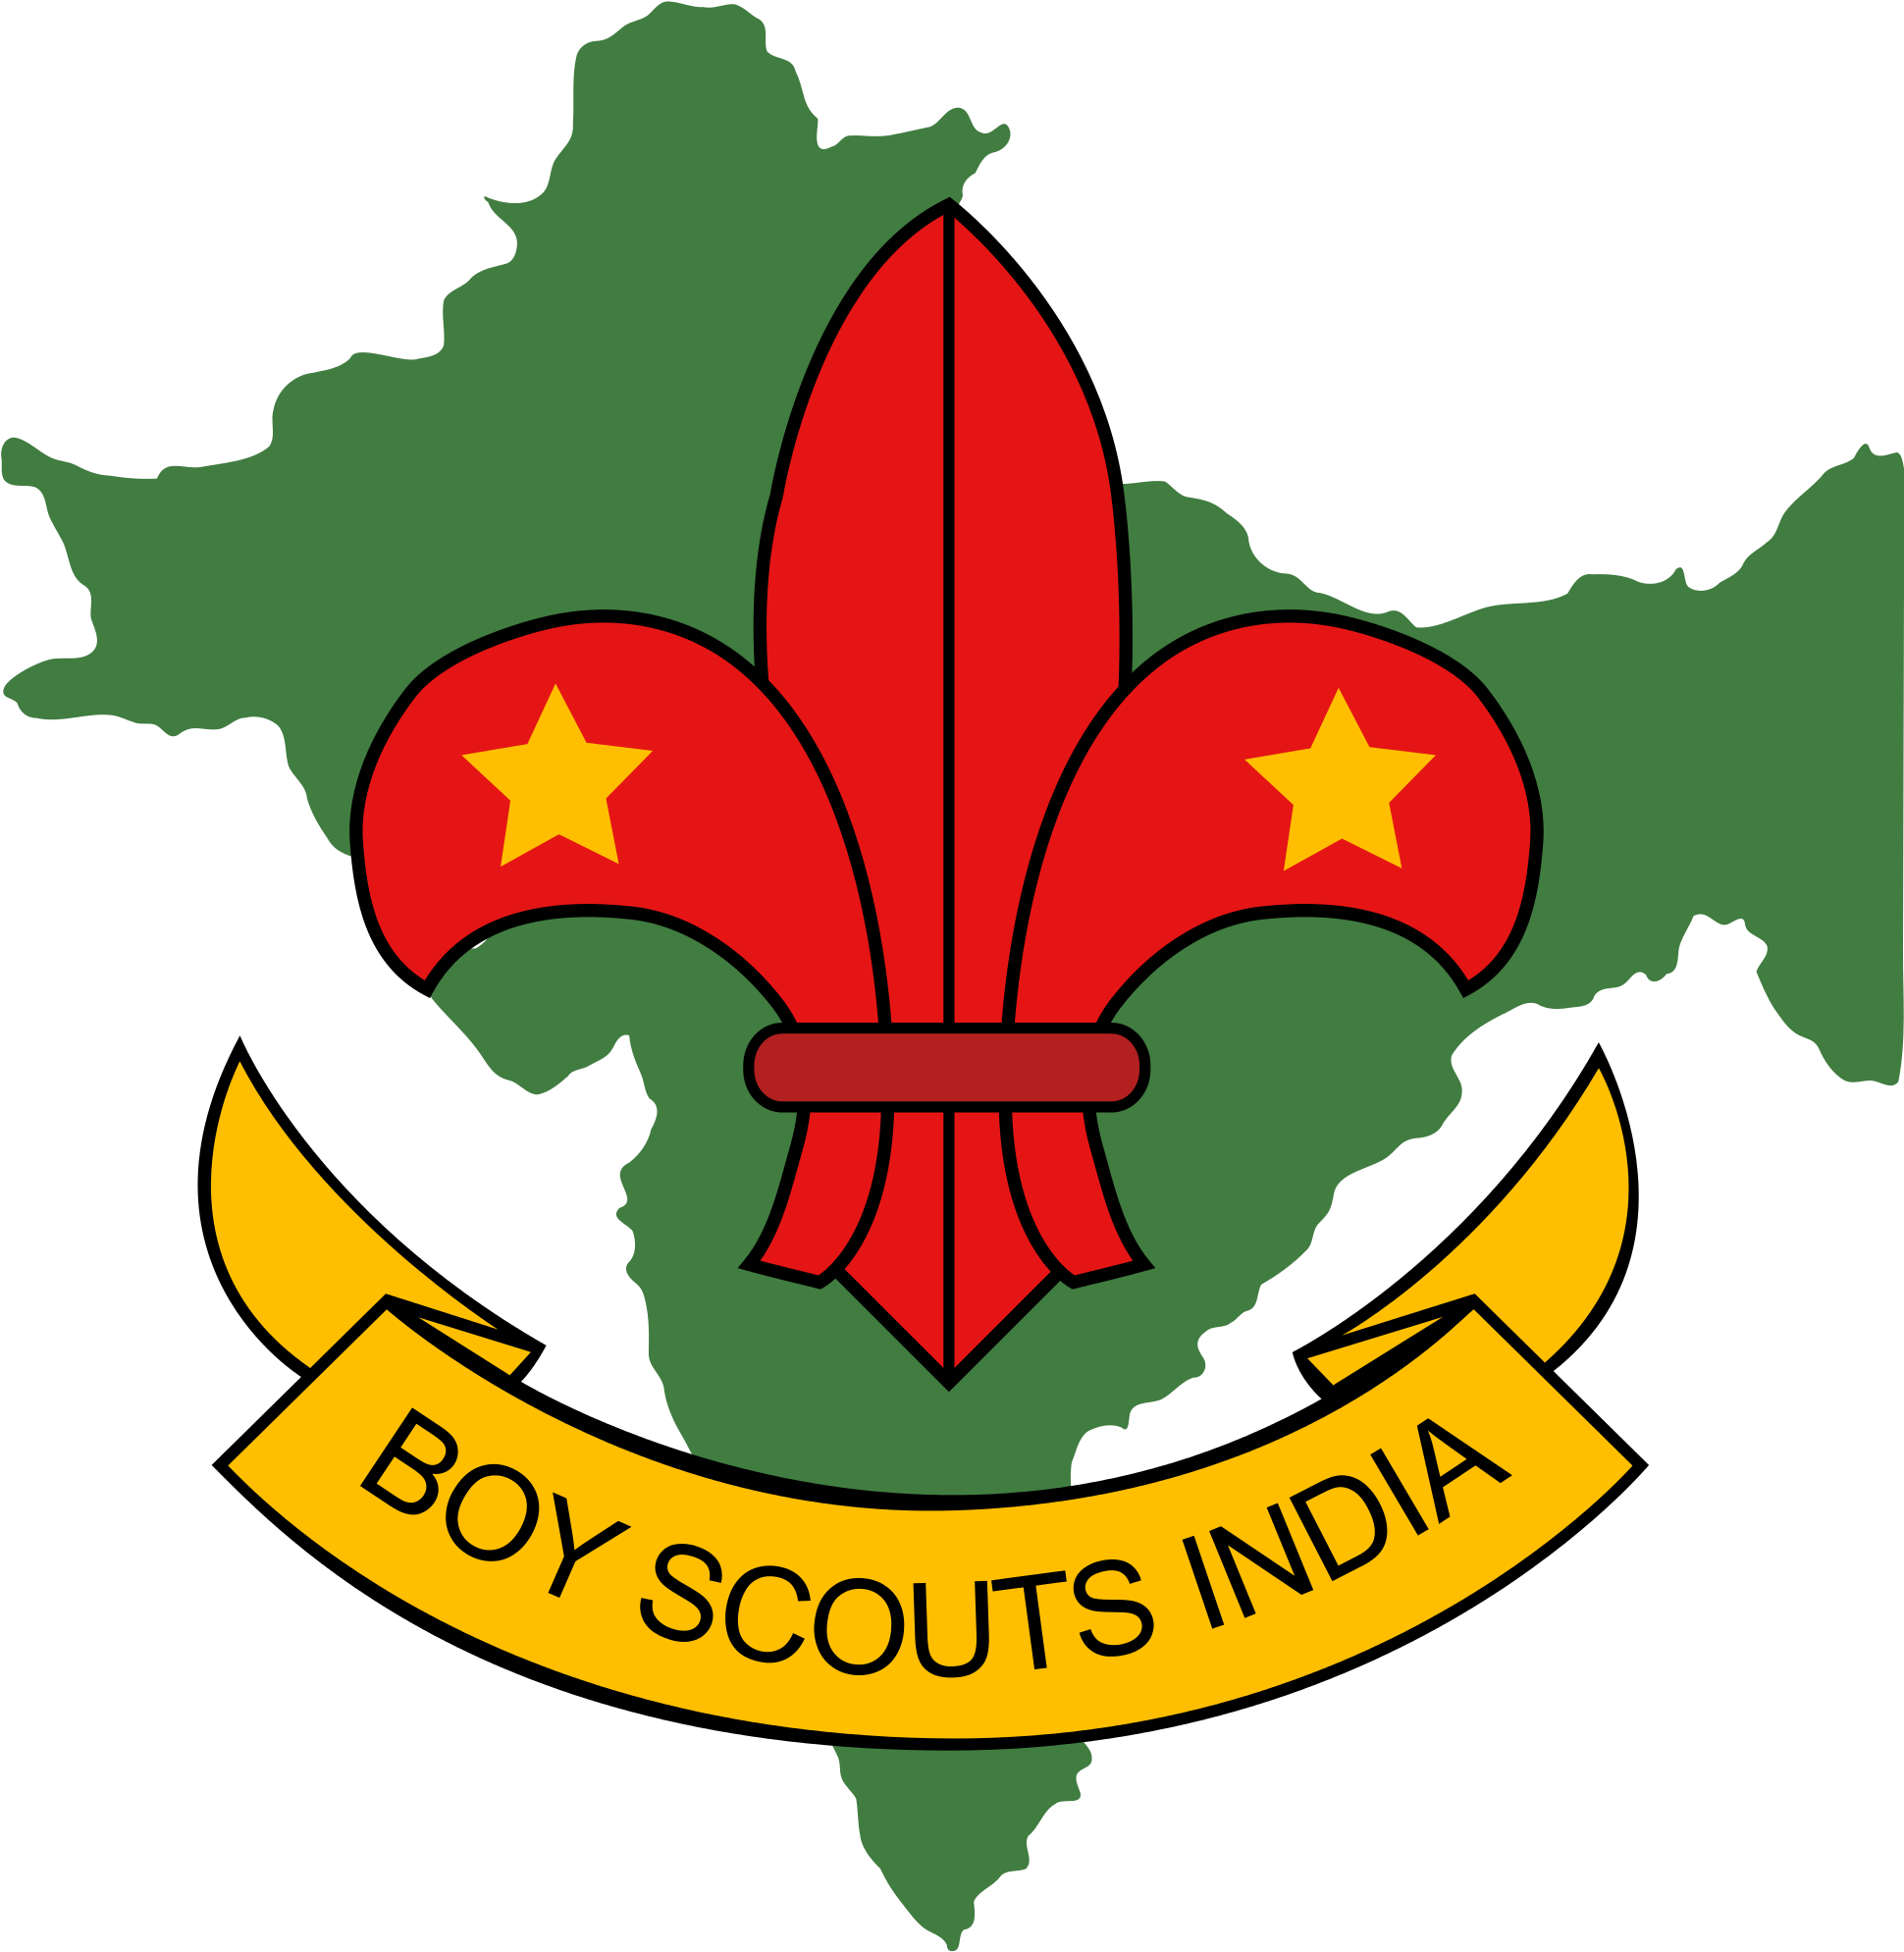 Boy Scouts Association In India - Bharat Scouts And Guides (2000x2126)